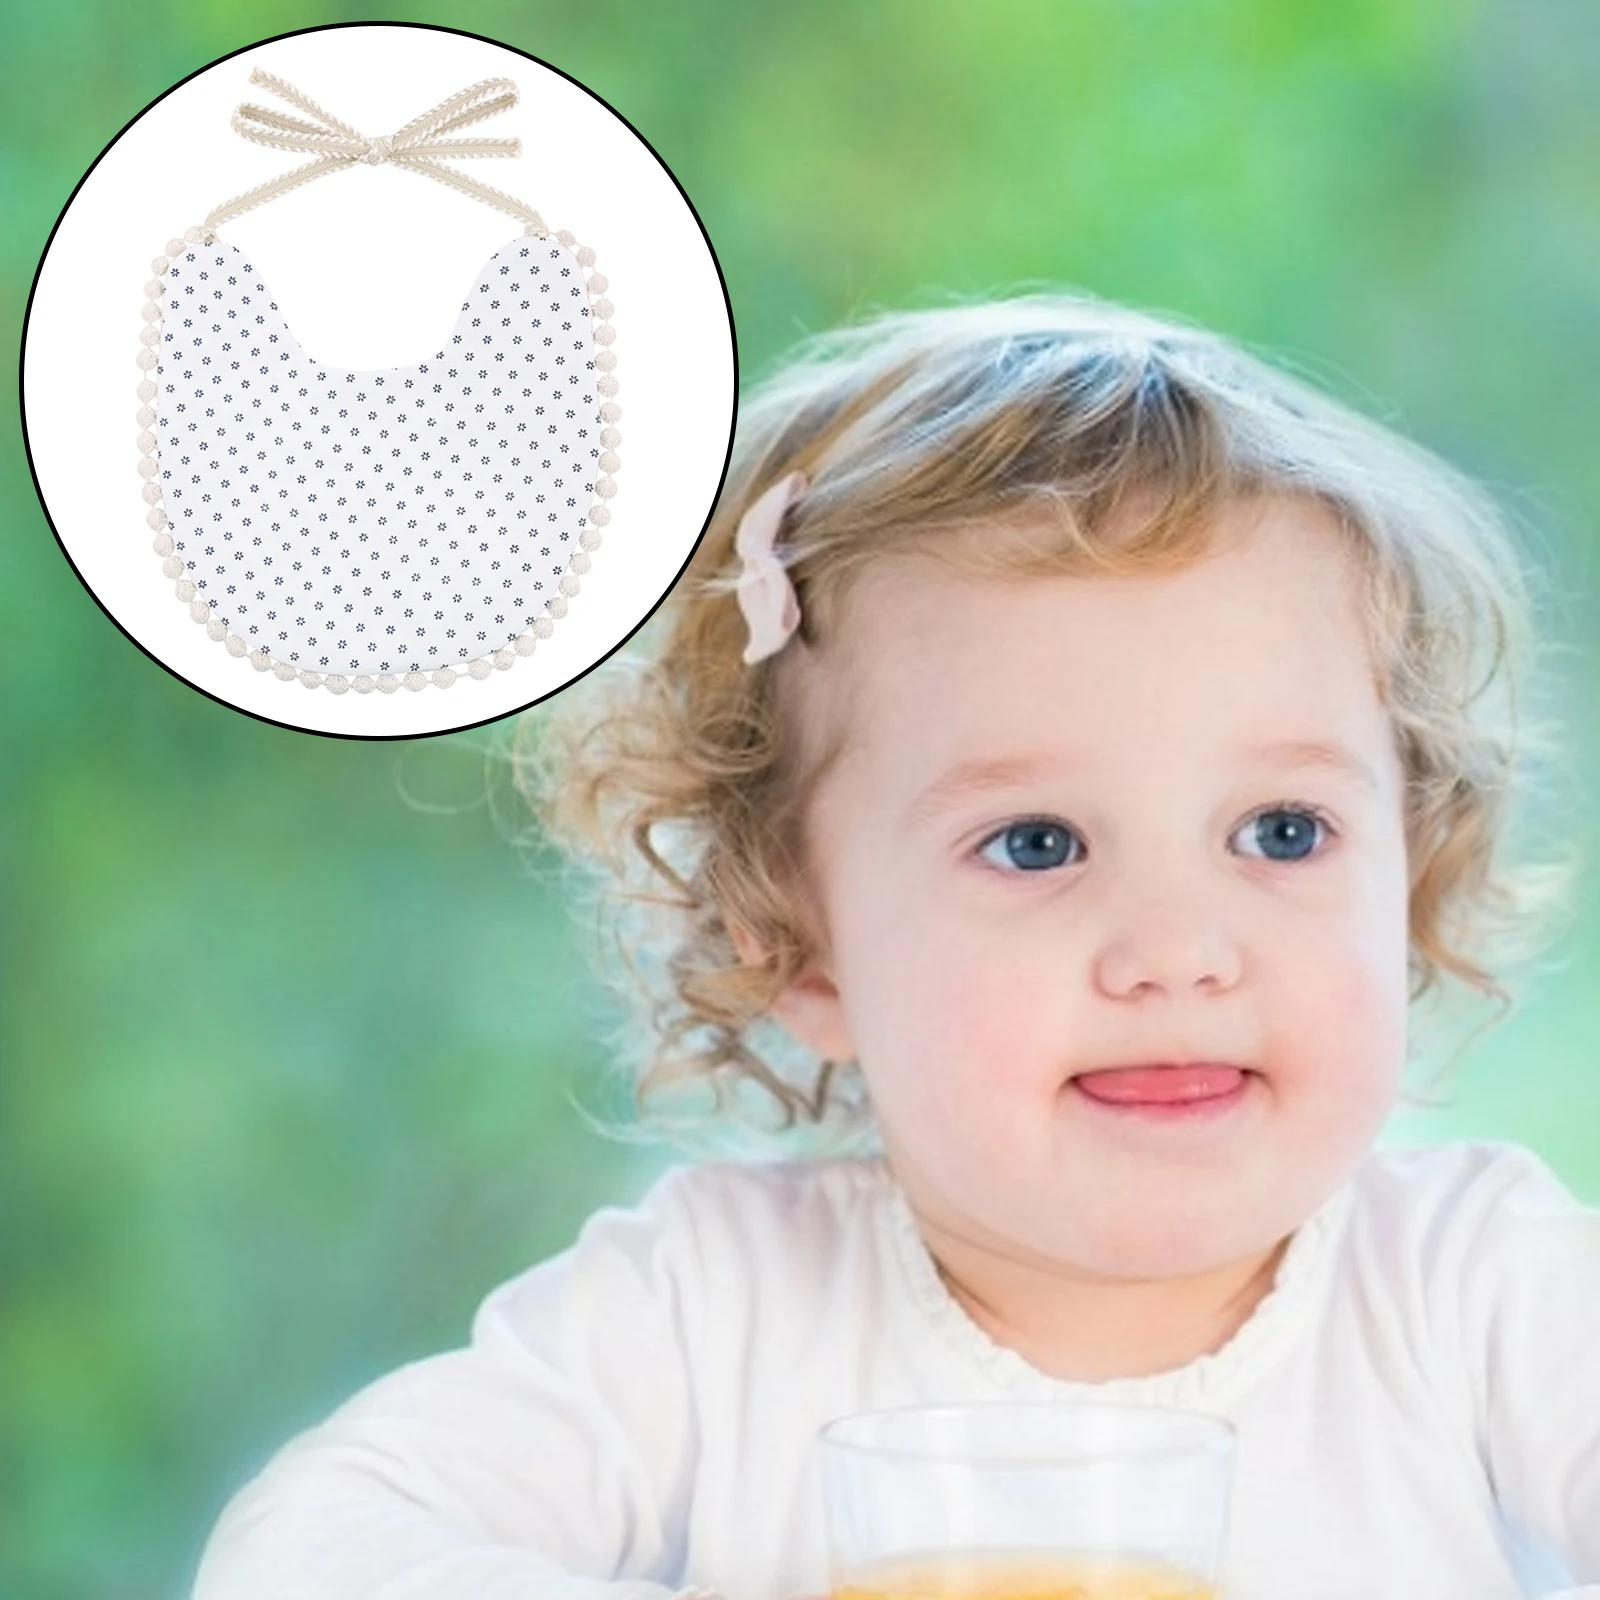 Adjustable Neckband Baby Feeding Bib Linen Cotton Eating Drinking Drooling Apron Protection for Toddler Newborn 0-4 Months